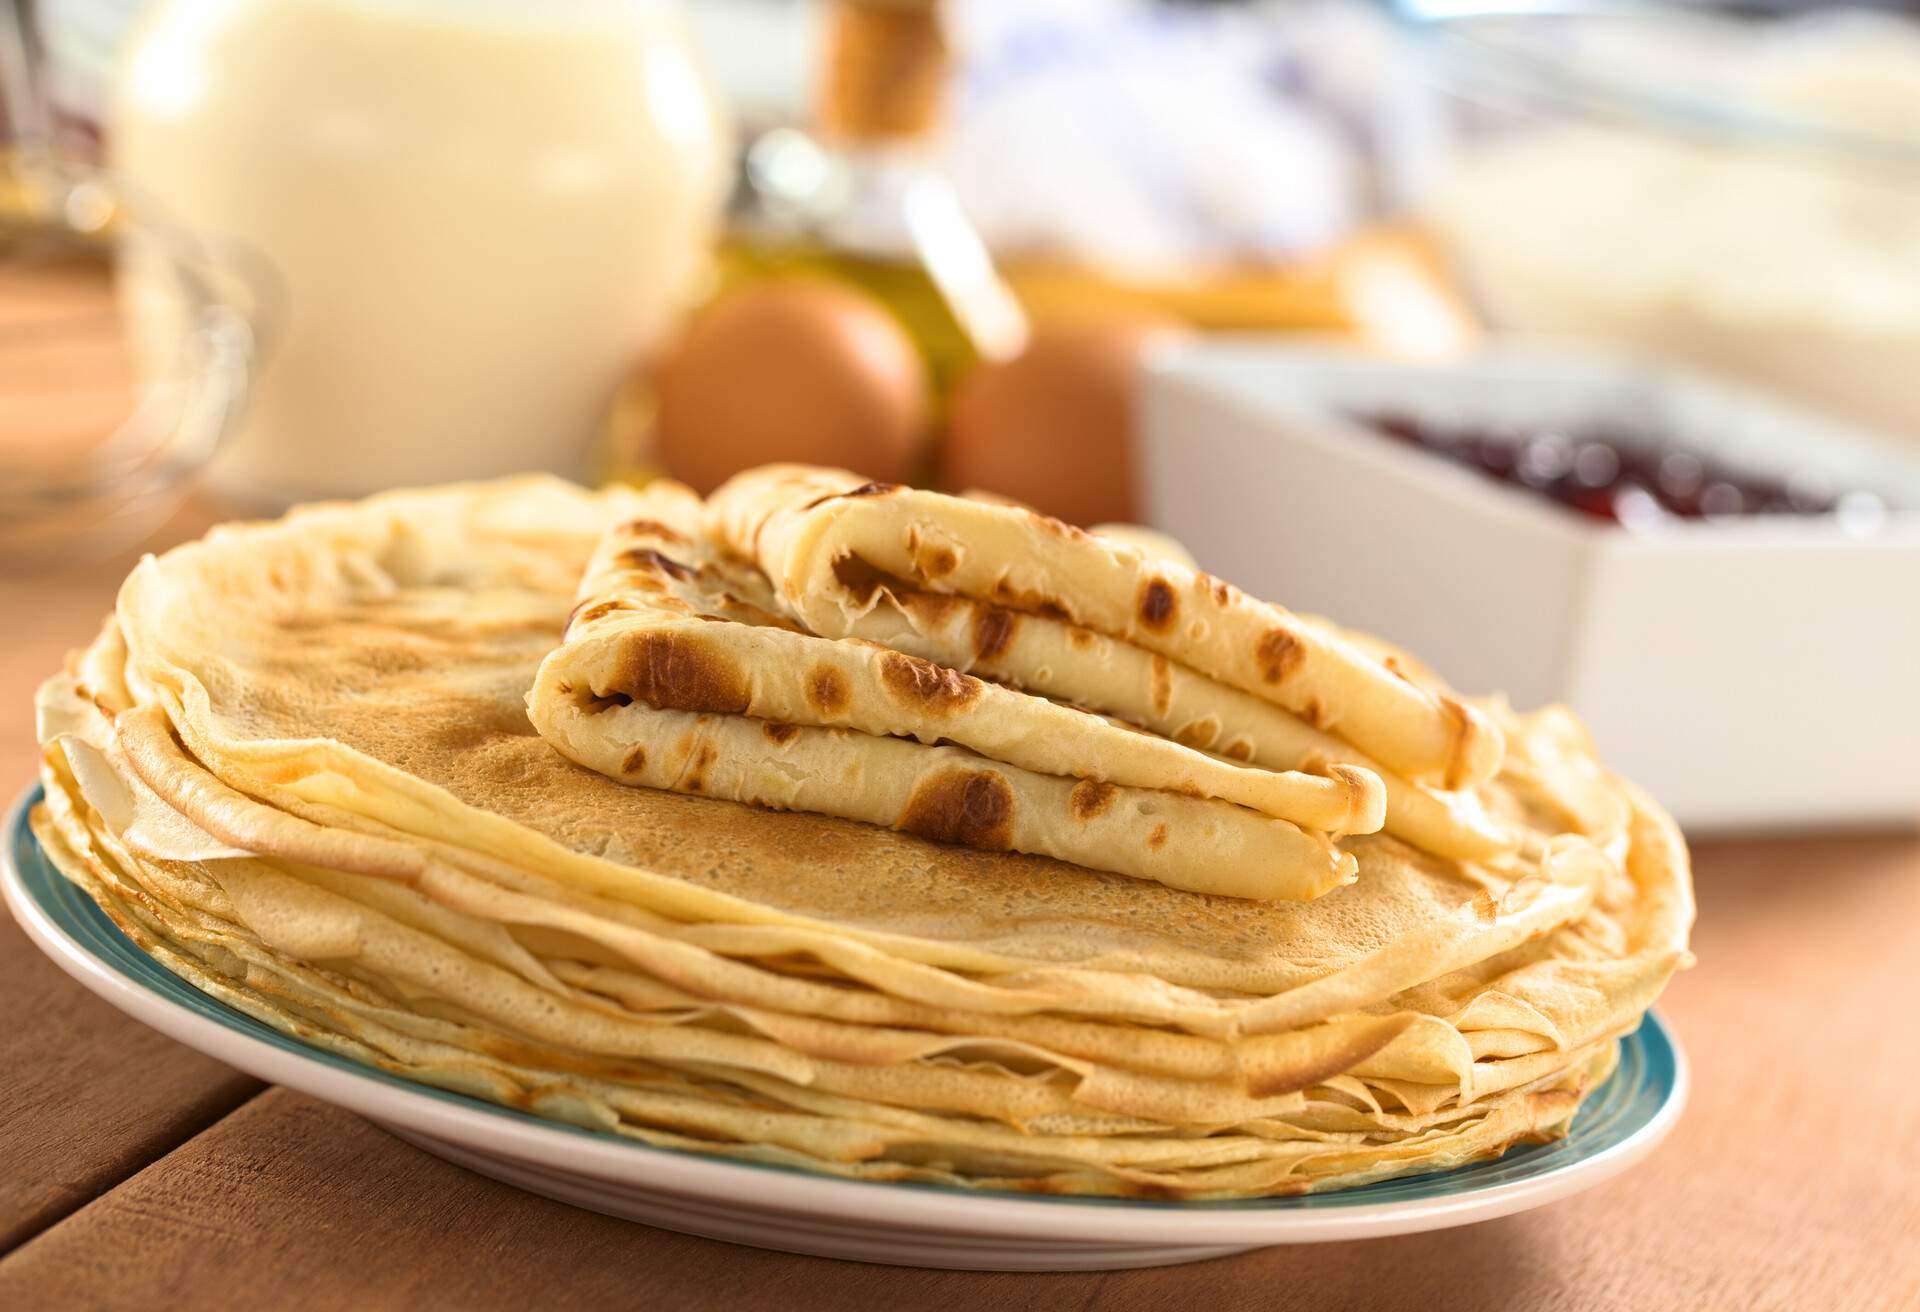 Fresh homemade crepes on plate with ingredients and strawberry jam in the back (Selective Focus, Focus on the front edge of the lower folded crepe); Shutterstock ID 103657649; Purpose: ; Brand (KAYAK, Momondo, Any):